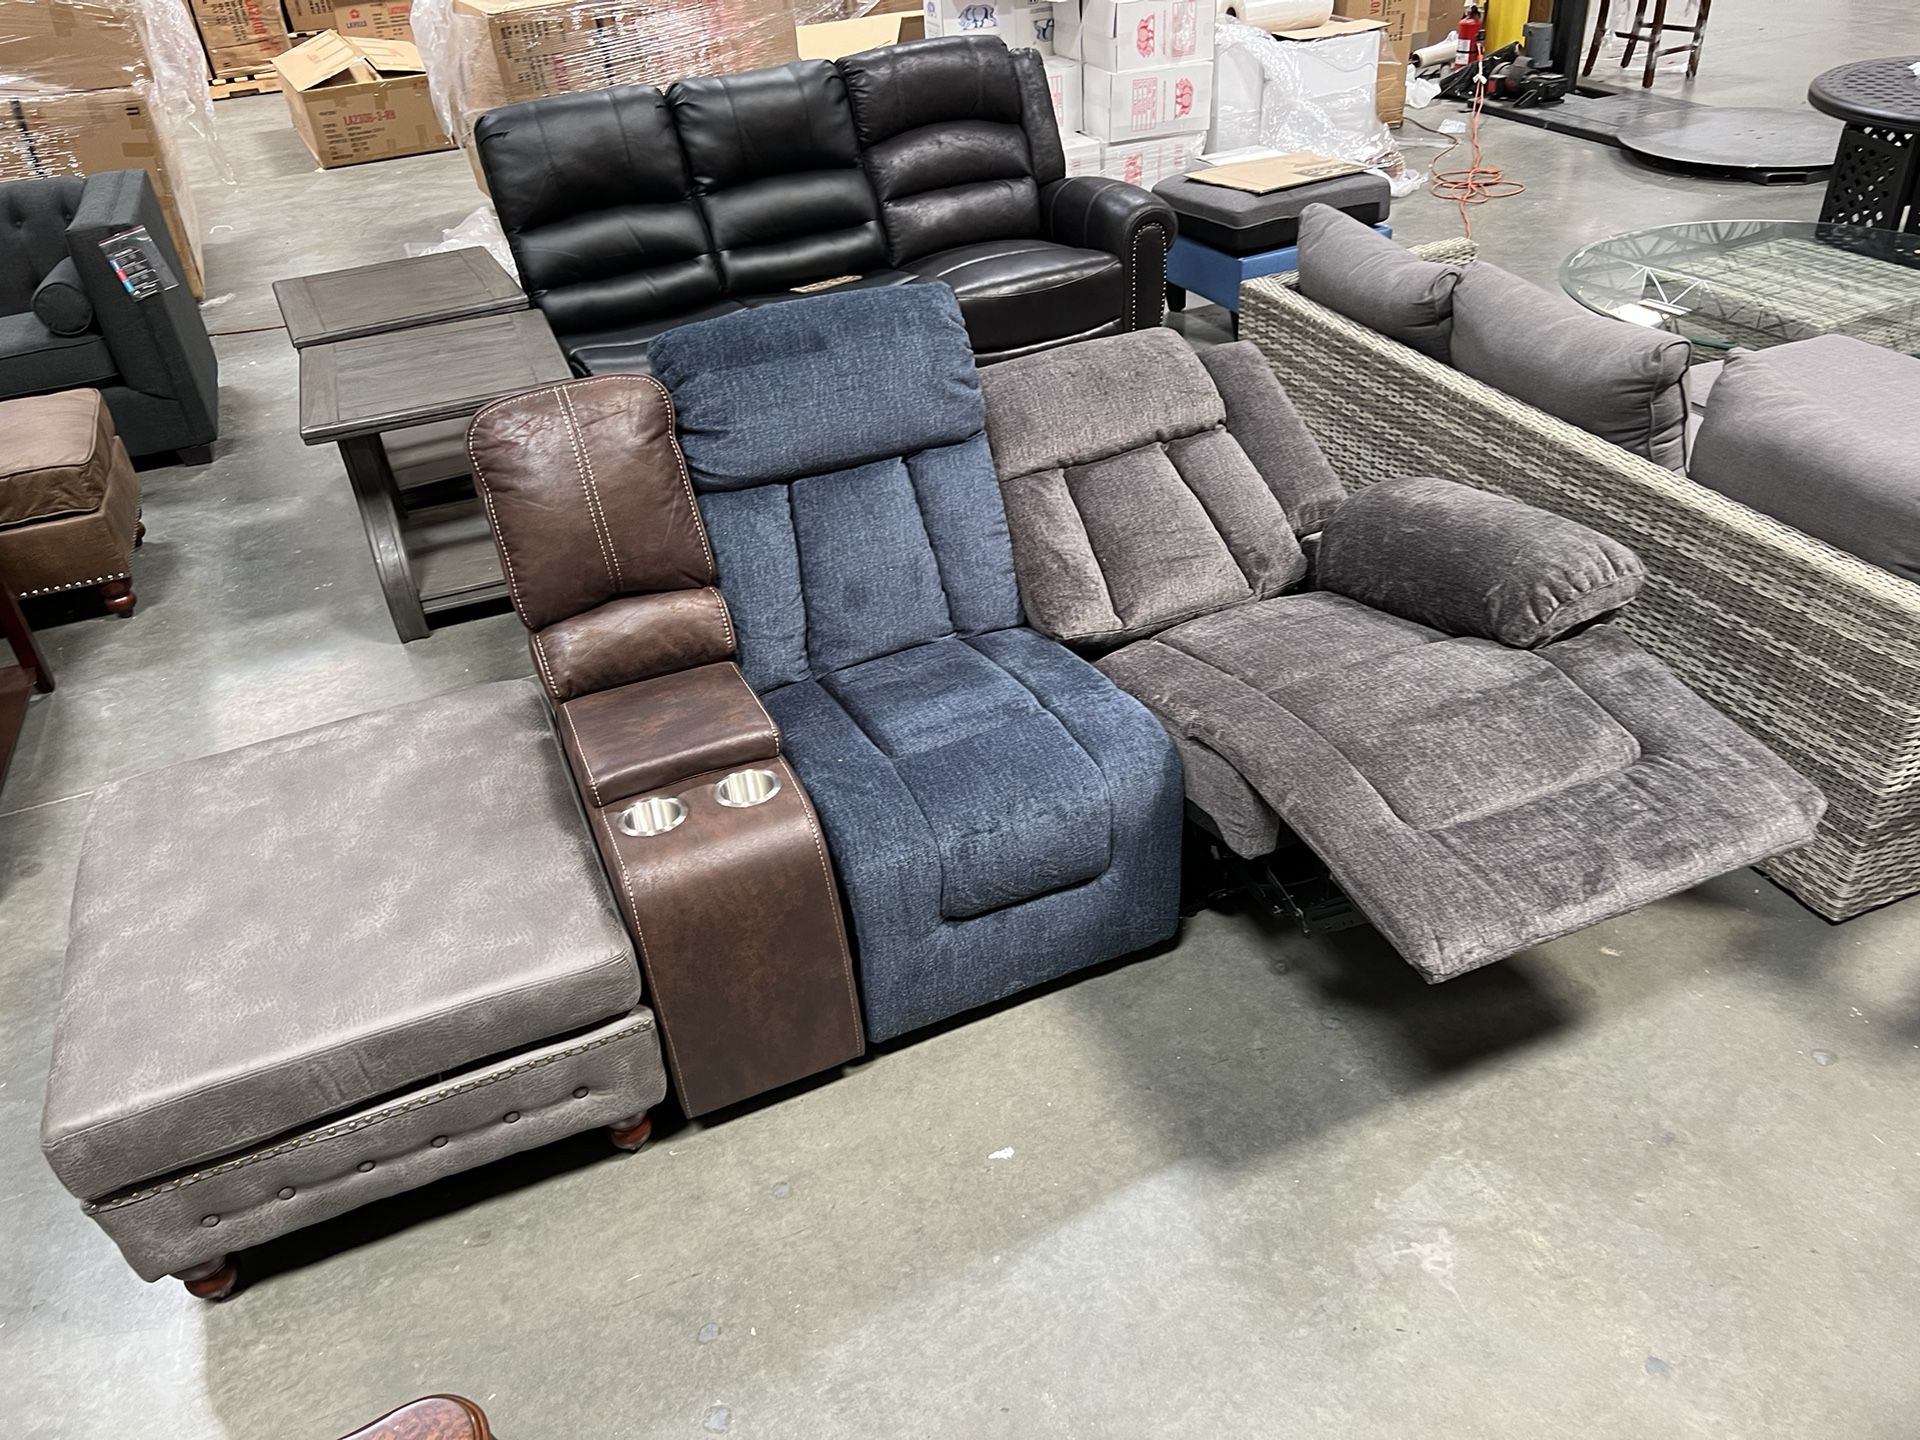 New! Power Motion Recliner With USB Charger, Recliner, Power Recliner,  Comfortable Recliner With Cupholders And Ottoman, Recliner Sofa,Recliner Couch